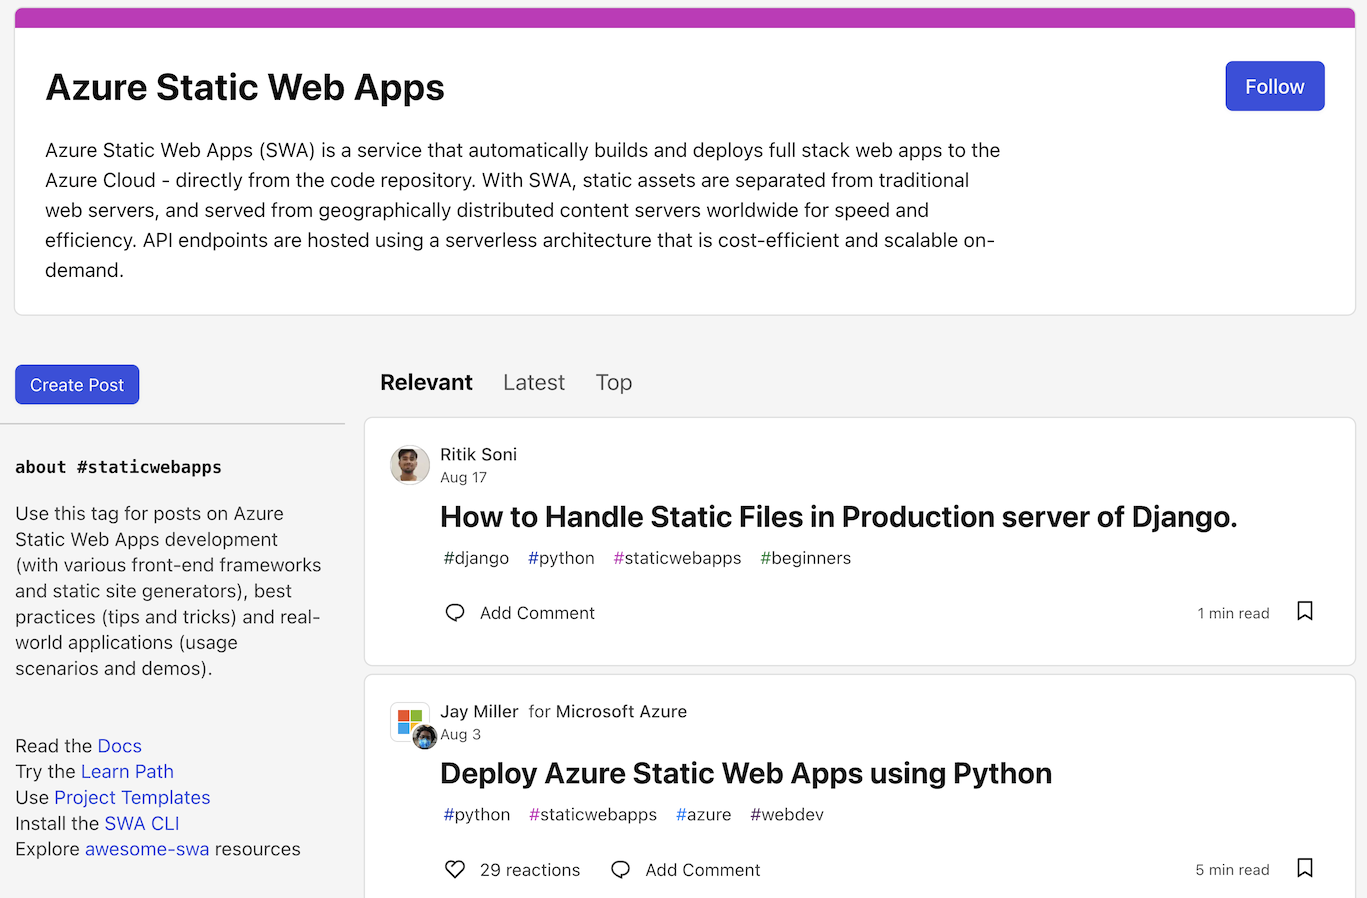 dev.to #staticwebapps page